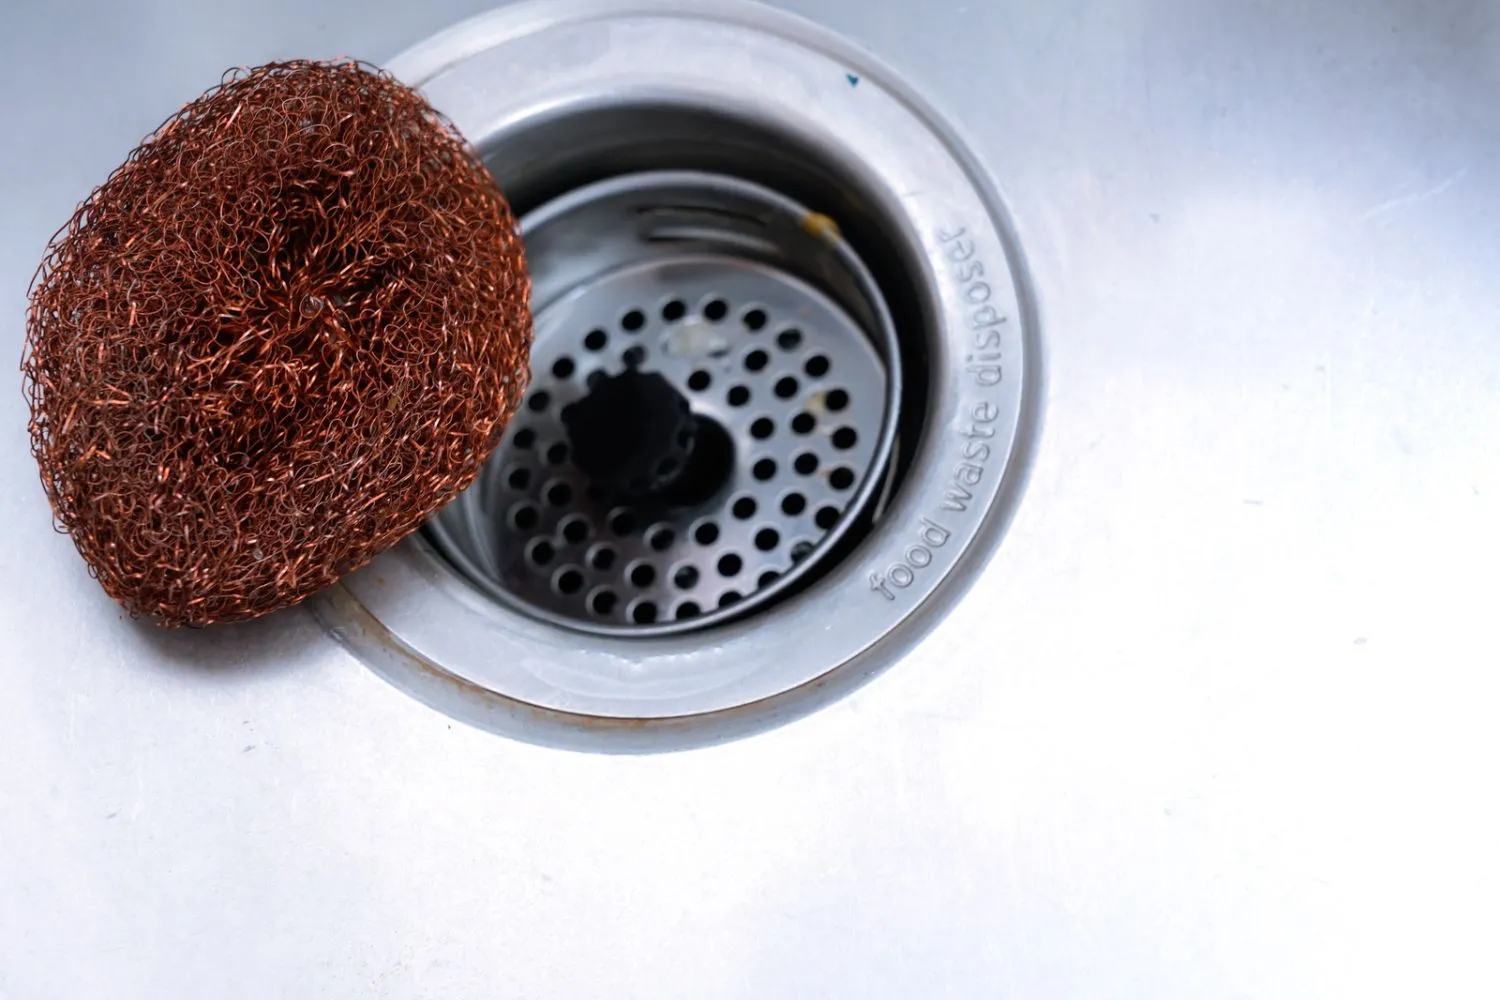 How to Naturally Clean and Deodorize Your Garbage Disposal